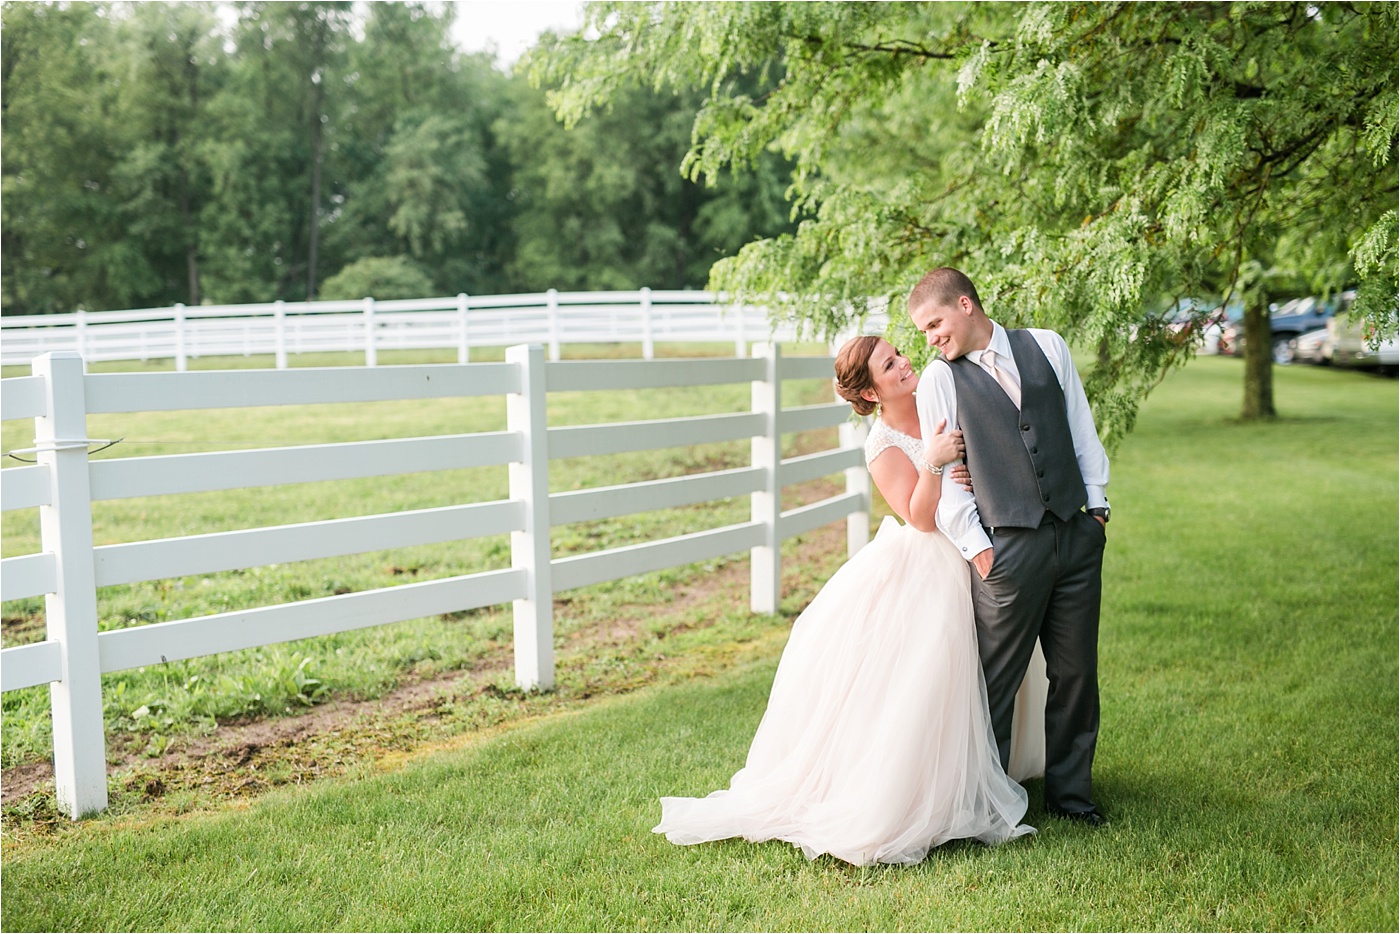 A Blush Outdoor wedding at Irongate Equestrian | KariMe Photography_0179